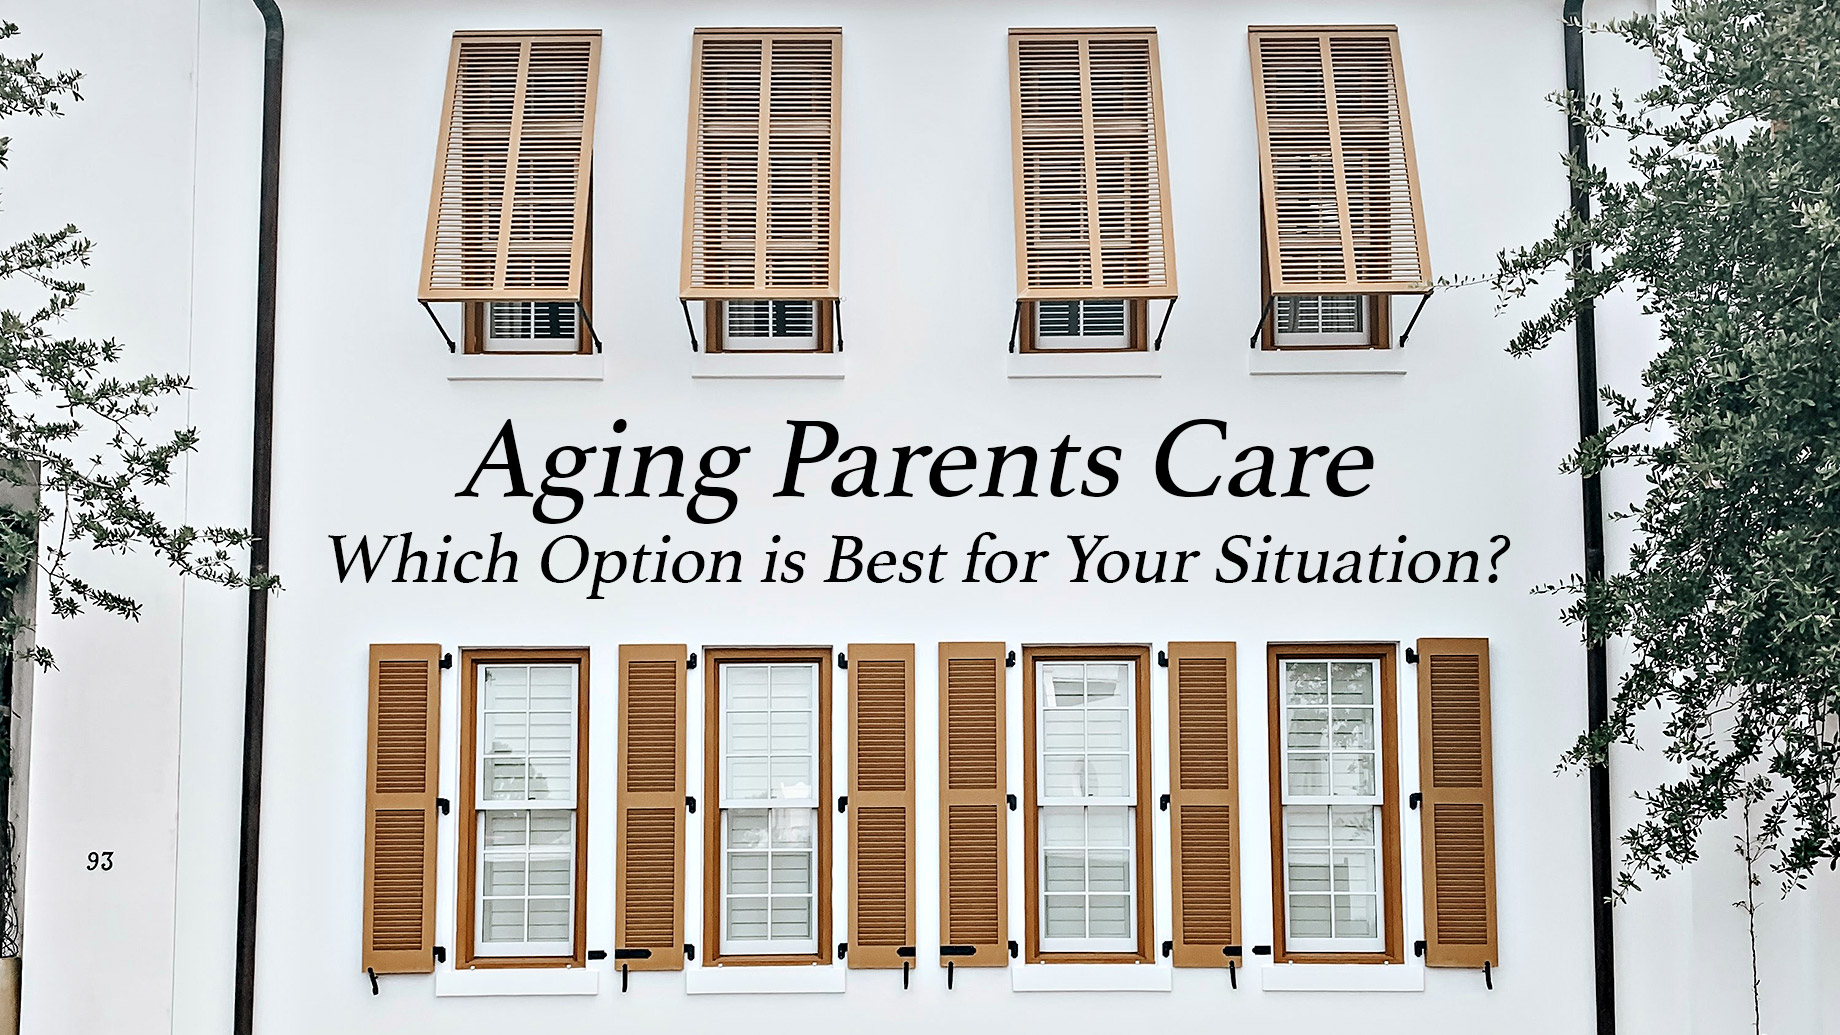 Aging Parents Care - Which Option is Best for Your Situation?